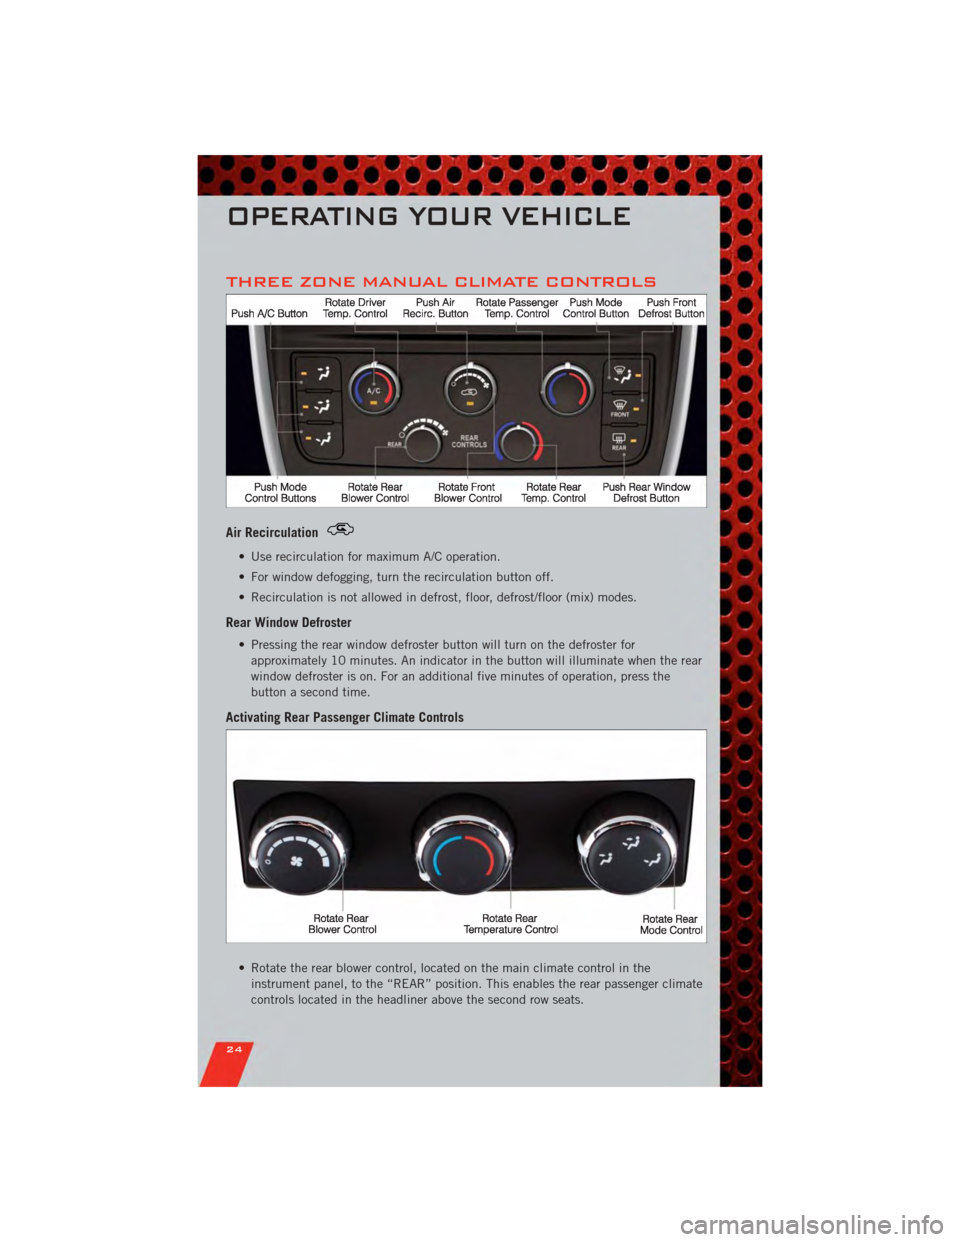 DODGE GRAND CARAVAN 2011 5.G User Guide THREE ZONE MANUAL CLIMATE CONTROLS
Air Recirculation
• Use recirculation for maximum A/C operation.
• For window defogging, turn the recirculation button off.
• Recirculation is not allowed in d